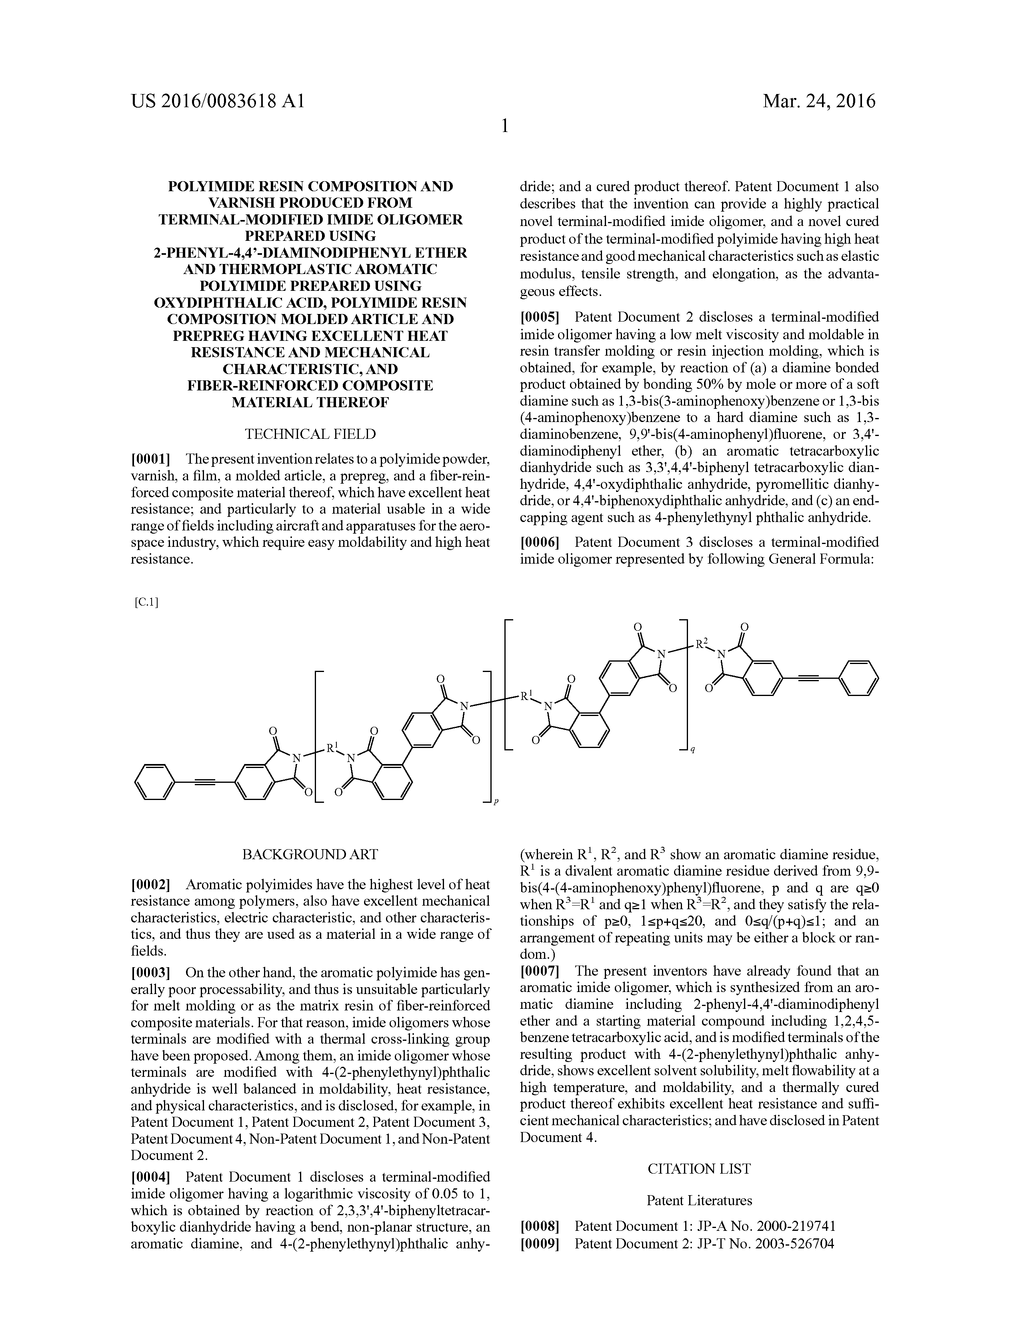 POLYIMIDE RESIN COMPOSITION AND VARNISH PRODUCED FROM TERMINAL-MODIFIED     IMIDE OLIGOMER PREPARED USING 2-PHENYL-4,4'-DIAMINODIPHENYL ETHER AND     THERMOPLASTIC AROMATIC POLYIMIDE PREPARED USING OXYDIPHTHALIC ACID,     POLYIMIDE RESIN COMPOSITION MOLDED ARTICLE AND PREPREG HAVING EXCELLENT     HEAT RESISTANCE AND MECHANICAL CHARACTERISTIC, AND FIBER-REINFORCED     COMPOSITE MATERIAL THEREOF - diagram, schematic, and image 02